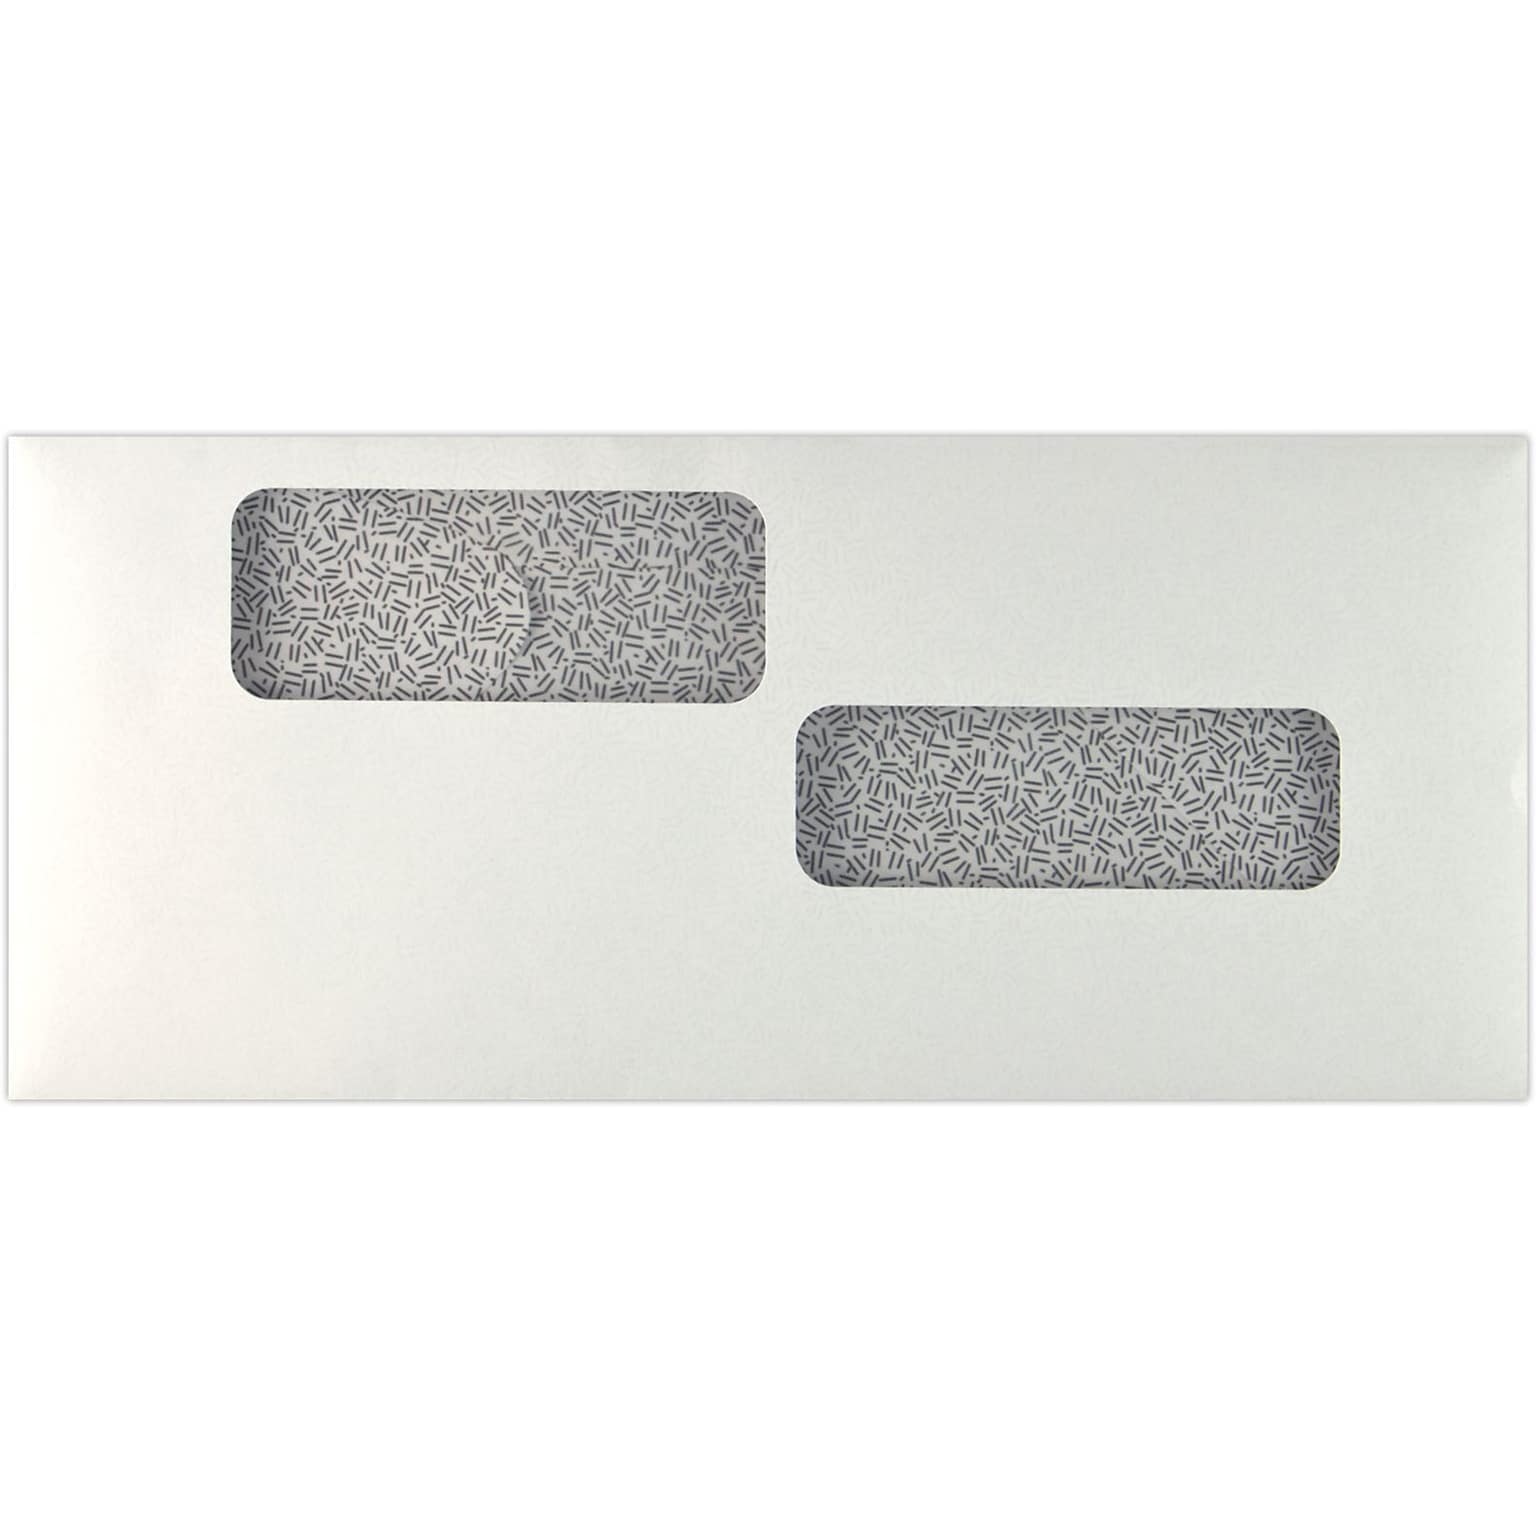 LUX Moistenable Glue Security Tinted #10 Double Window Payroll Envelope, 4 1/8 x 9 1/2, White, 250/Pack (10DW-24W-250)